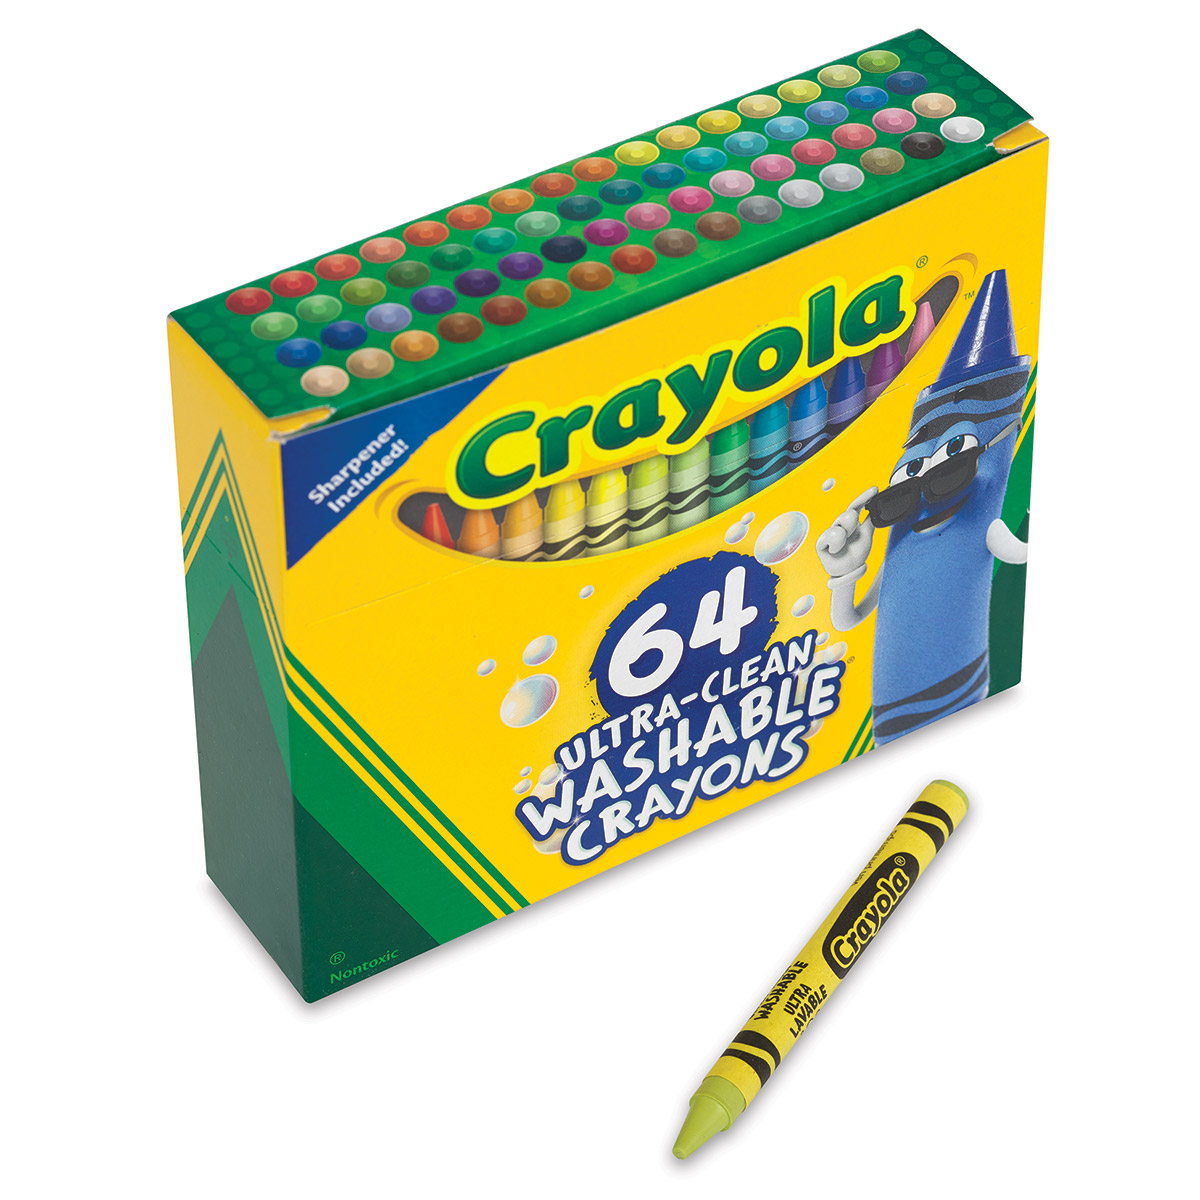 Crayola Ultra-Clean Washable Crayons with Sharpener, 64 Ct, Back to School Supplies, Multi-Color - image 1 of 5